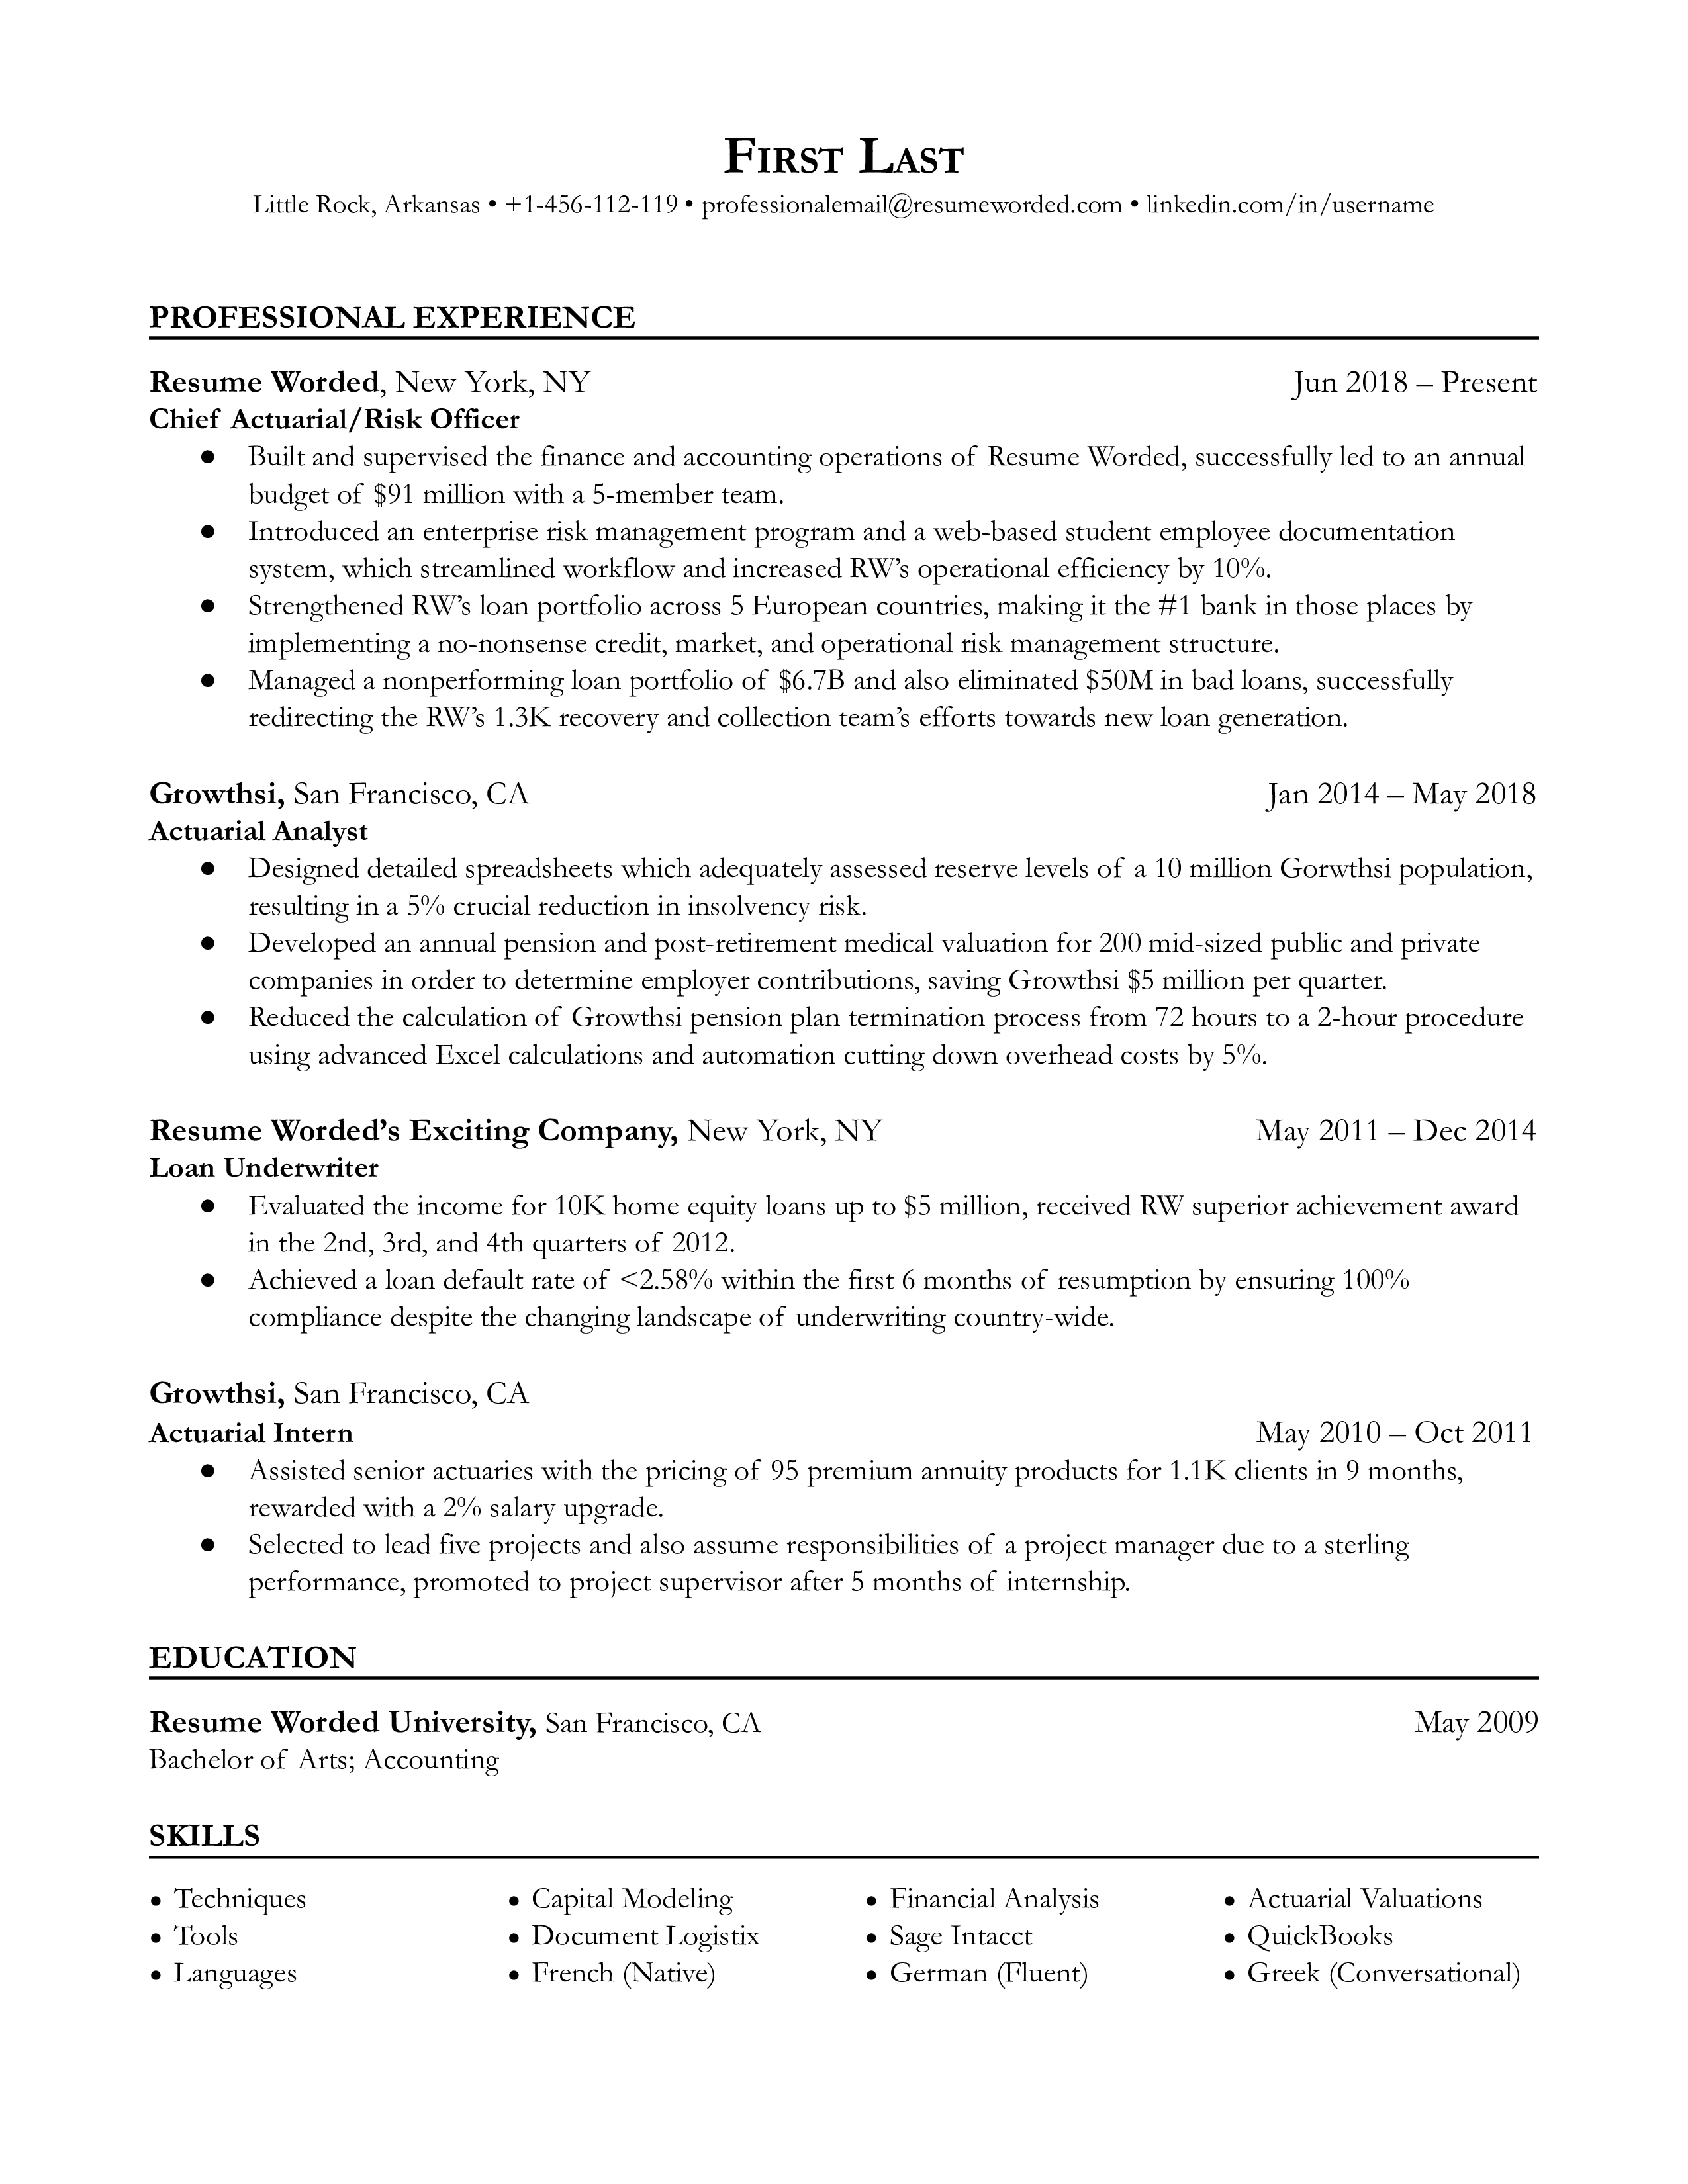 A chief actuarial risk officer sample resume that highlights fiscal success and managerial skills